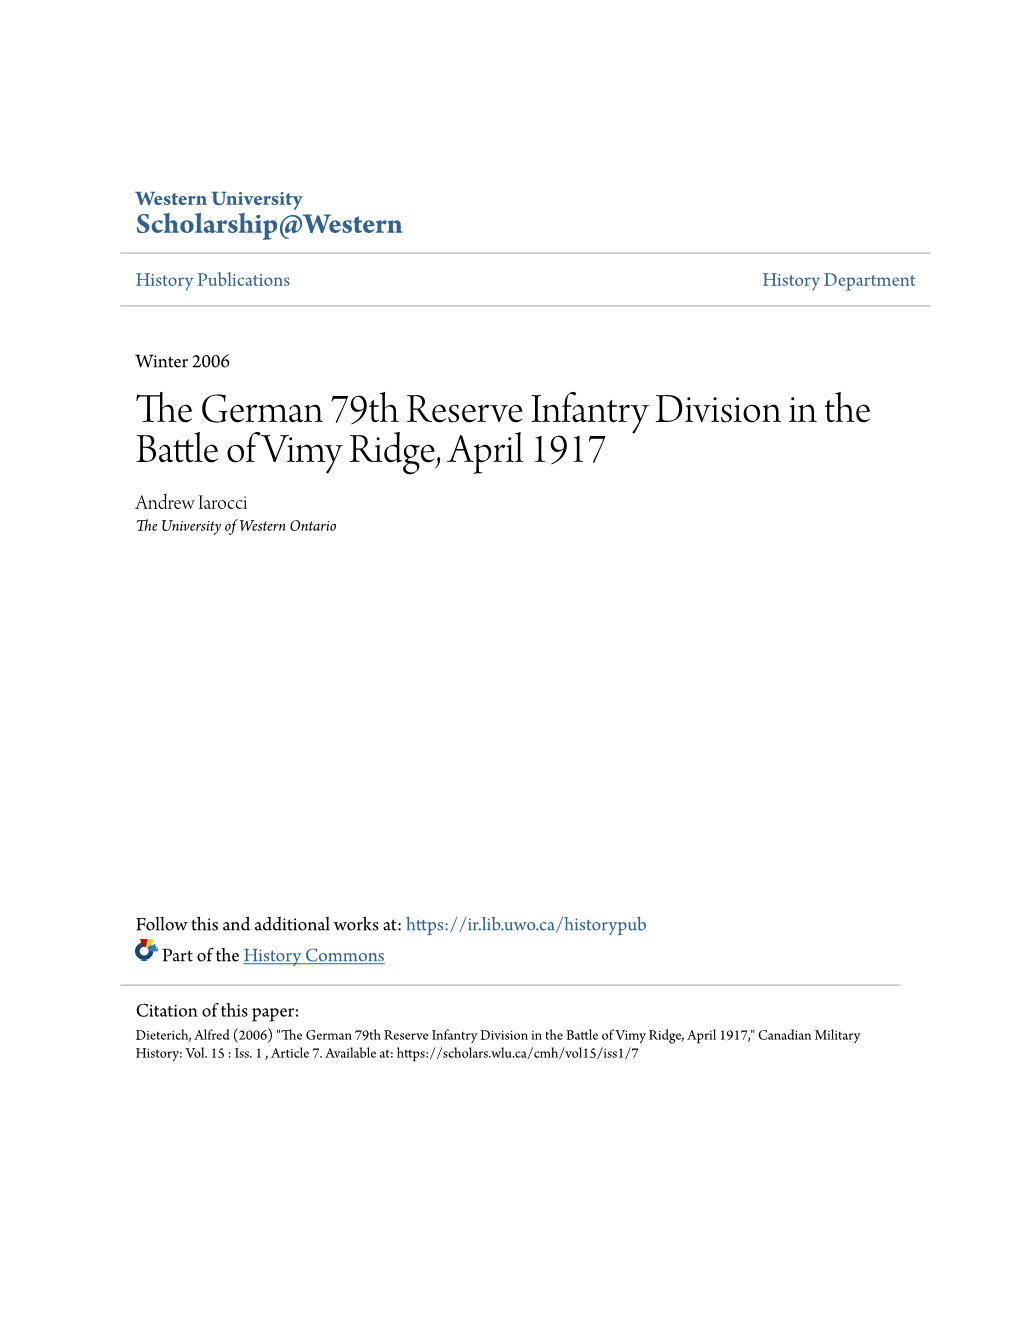 The German 79Th Reserve Infantry Division in the Battle of Vimy Ridge, April 1917